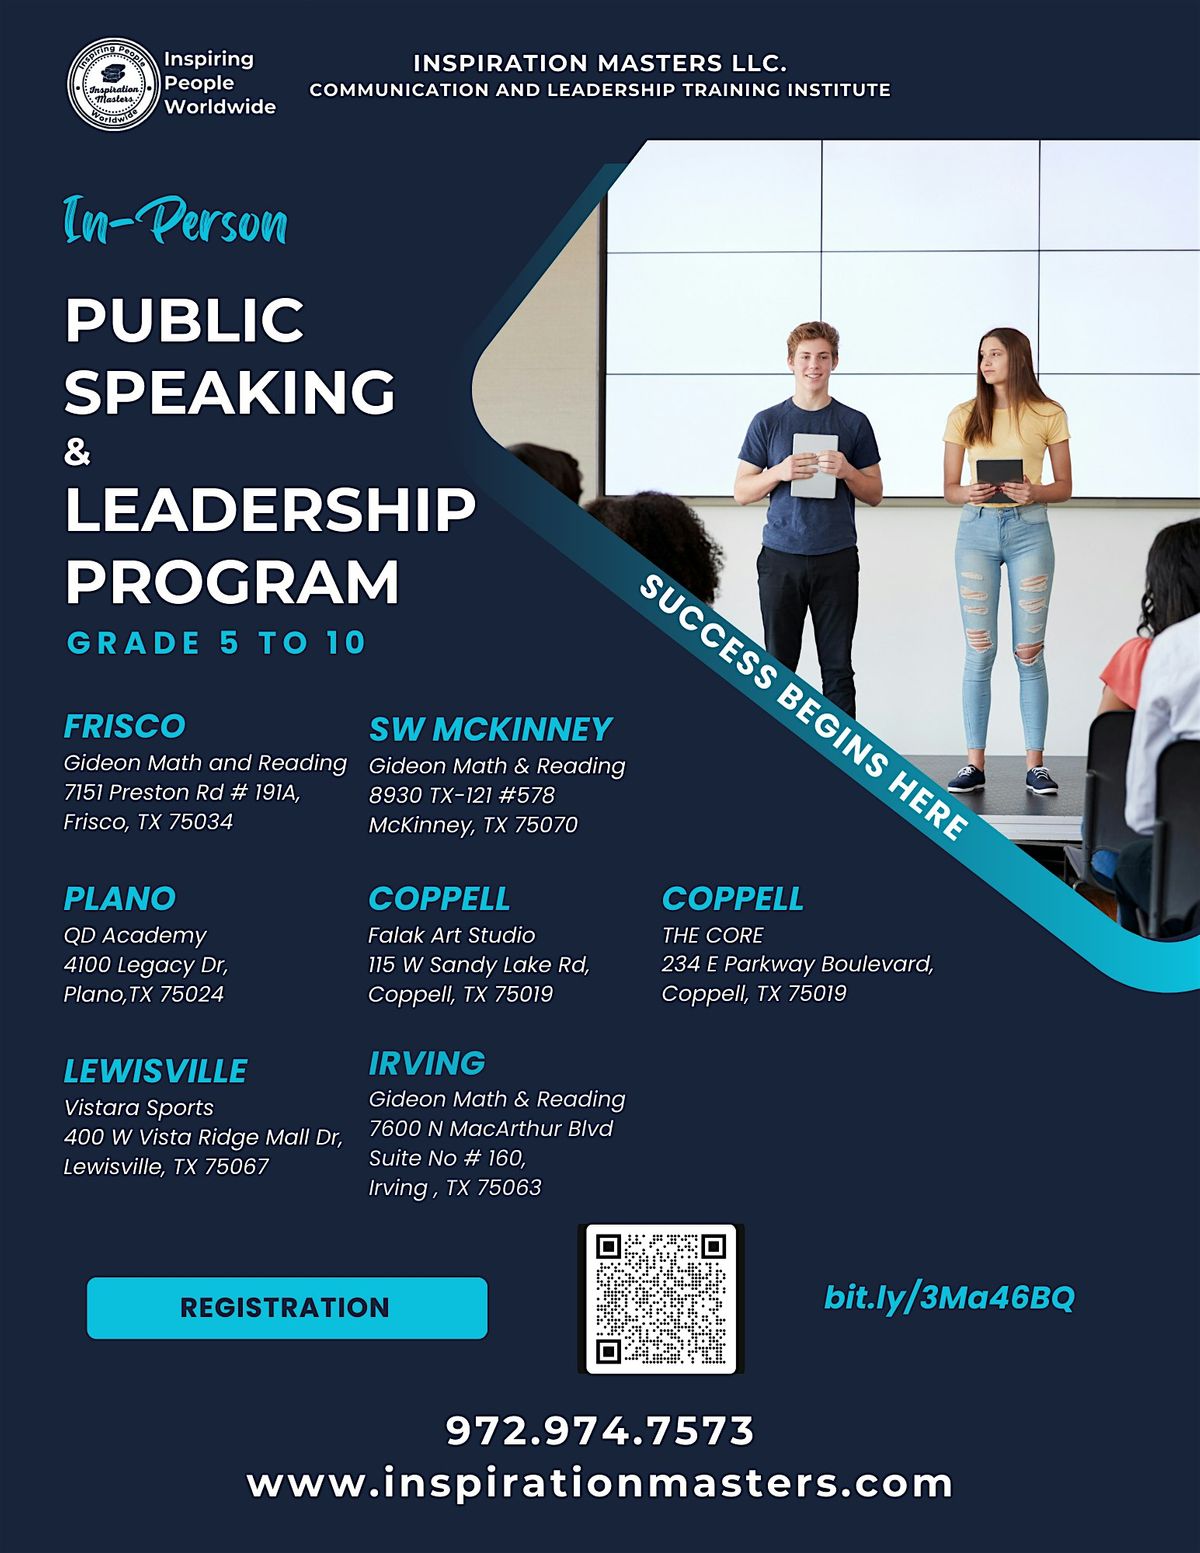 Public Speaking and Leadership Programs in Frisco TX for Grades 5 to 10